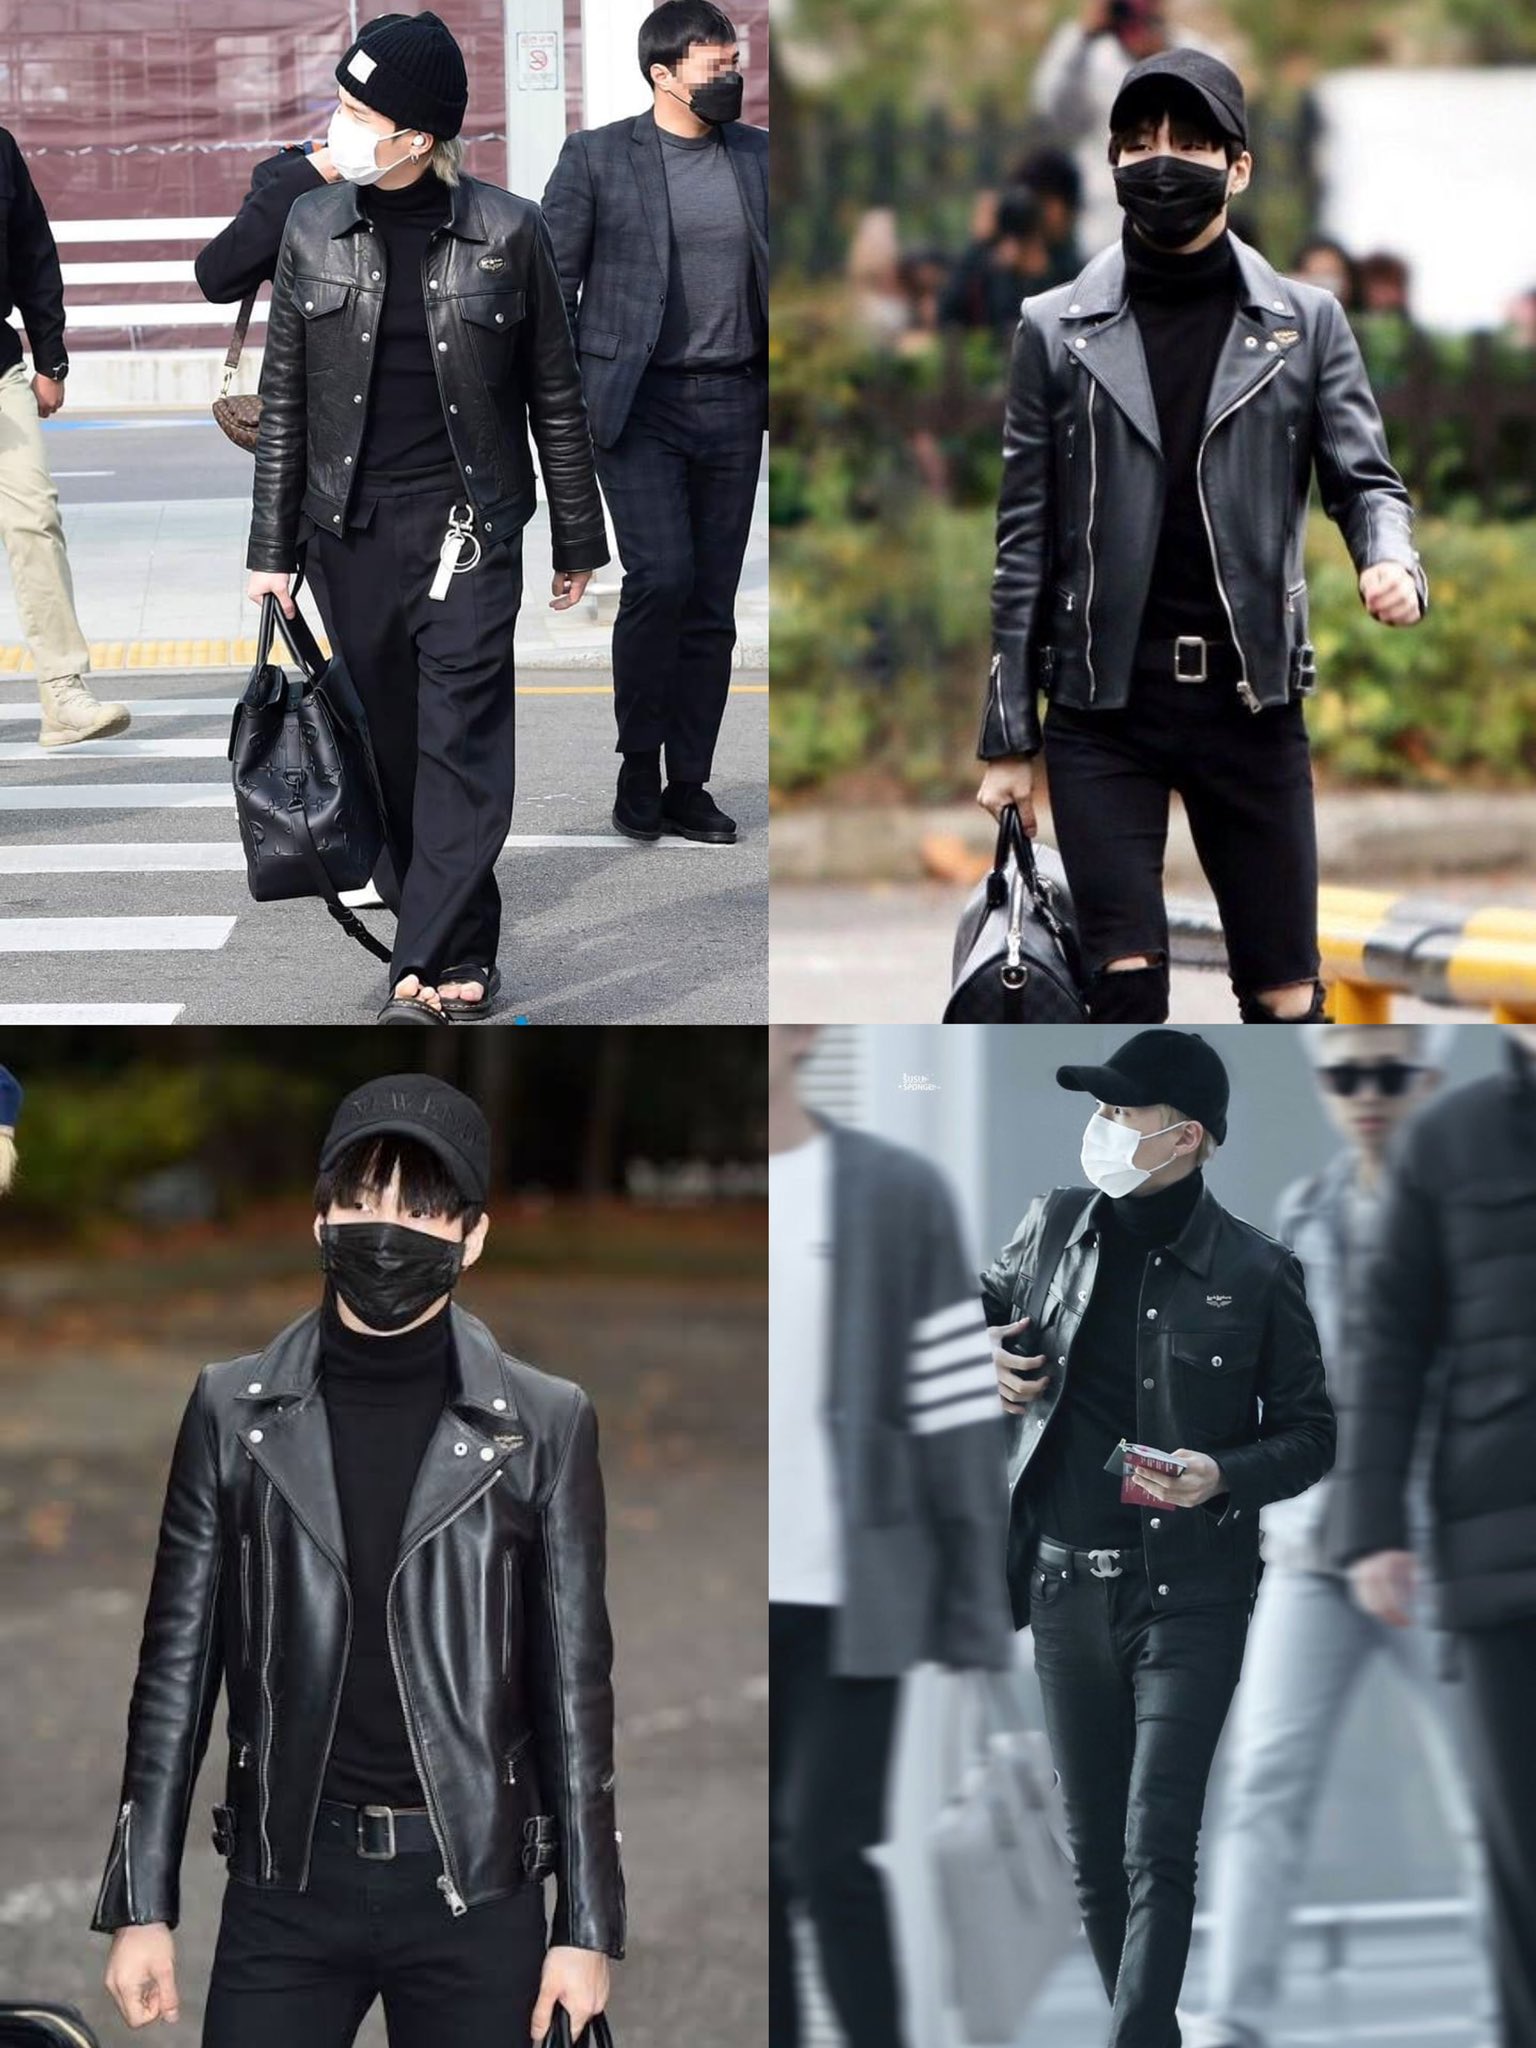 hourly namgiseok on X: "yoongi in leather jackets &gt;&gt;  X